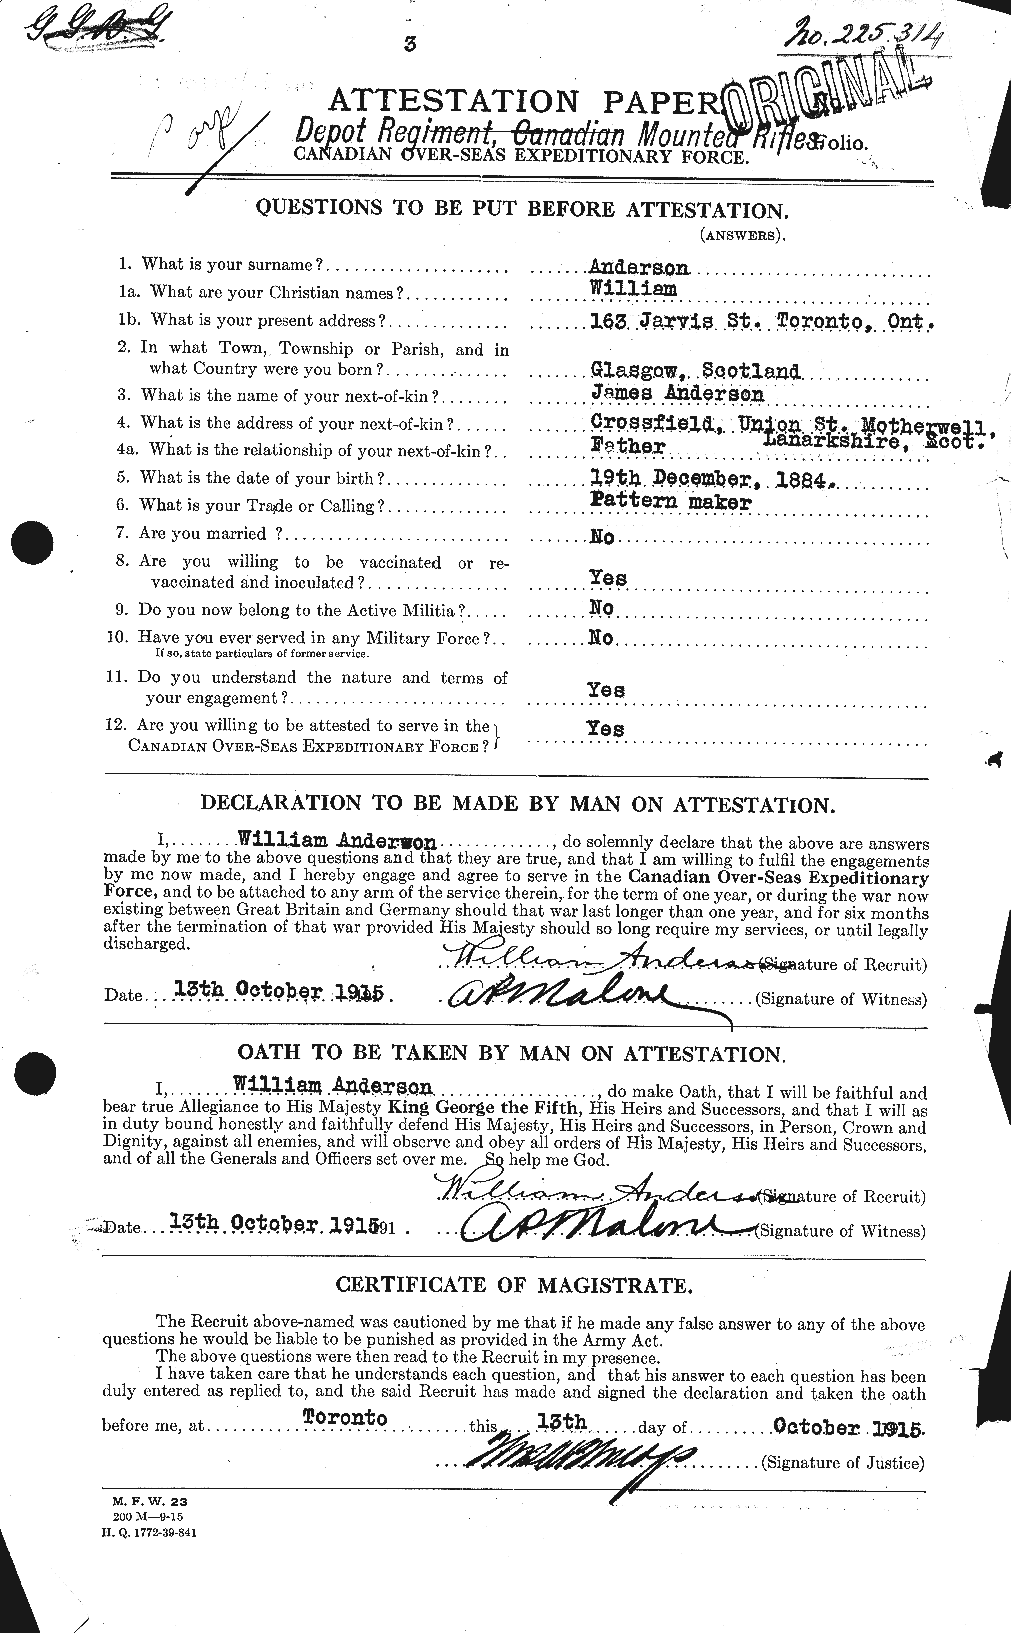 Personnel Records of the First World War - CEF 210763a